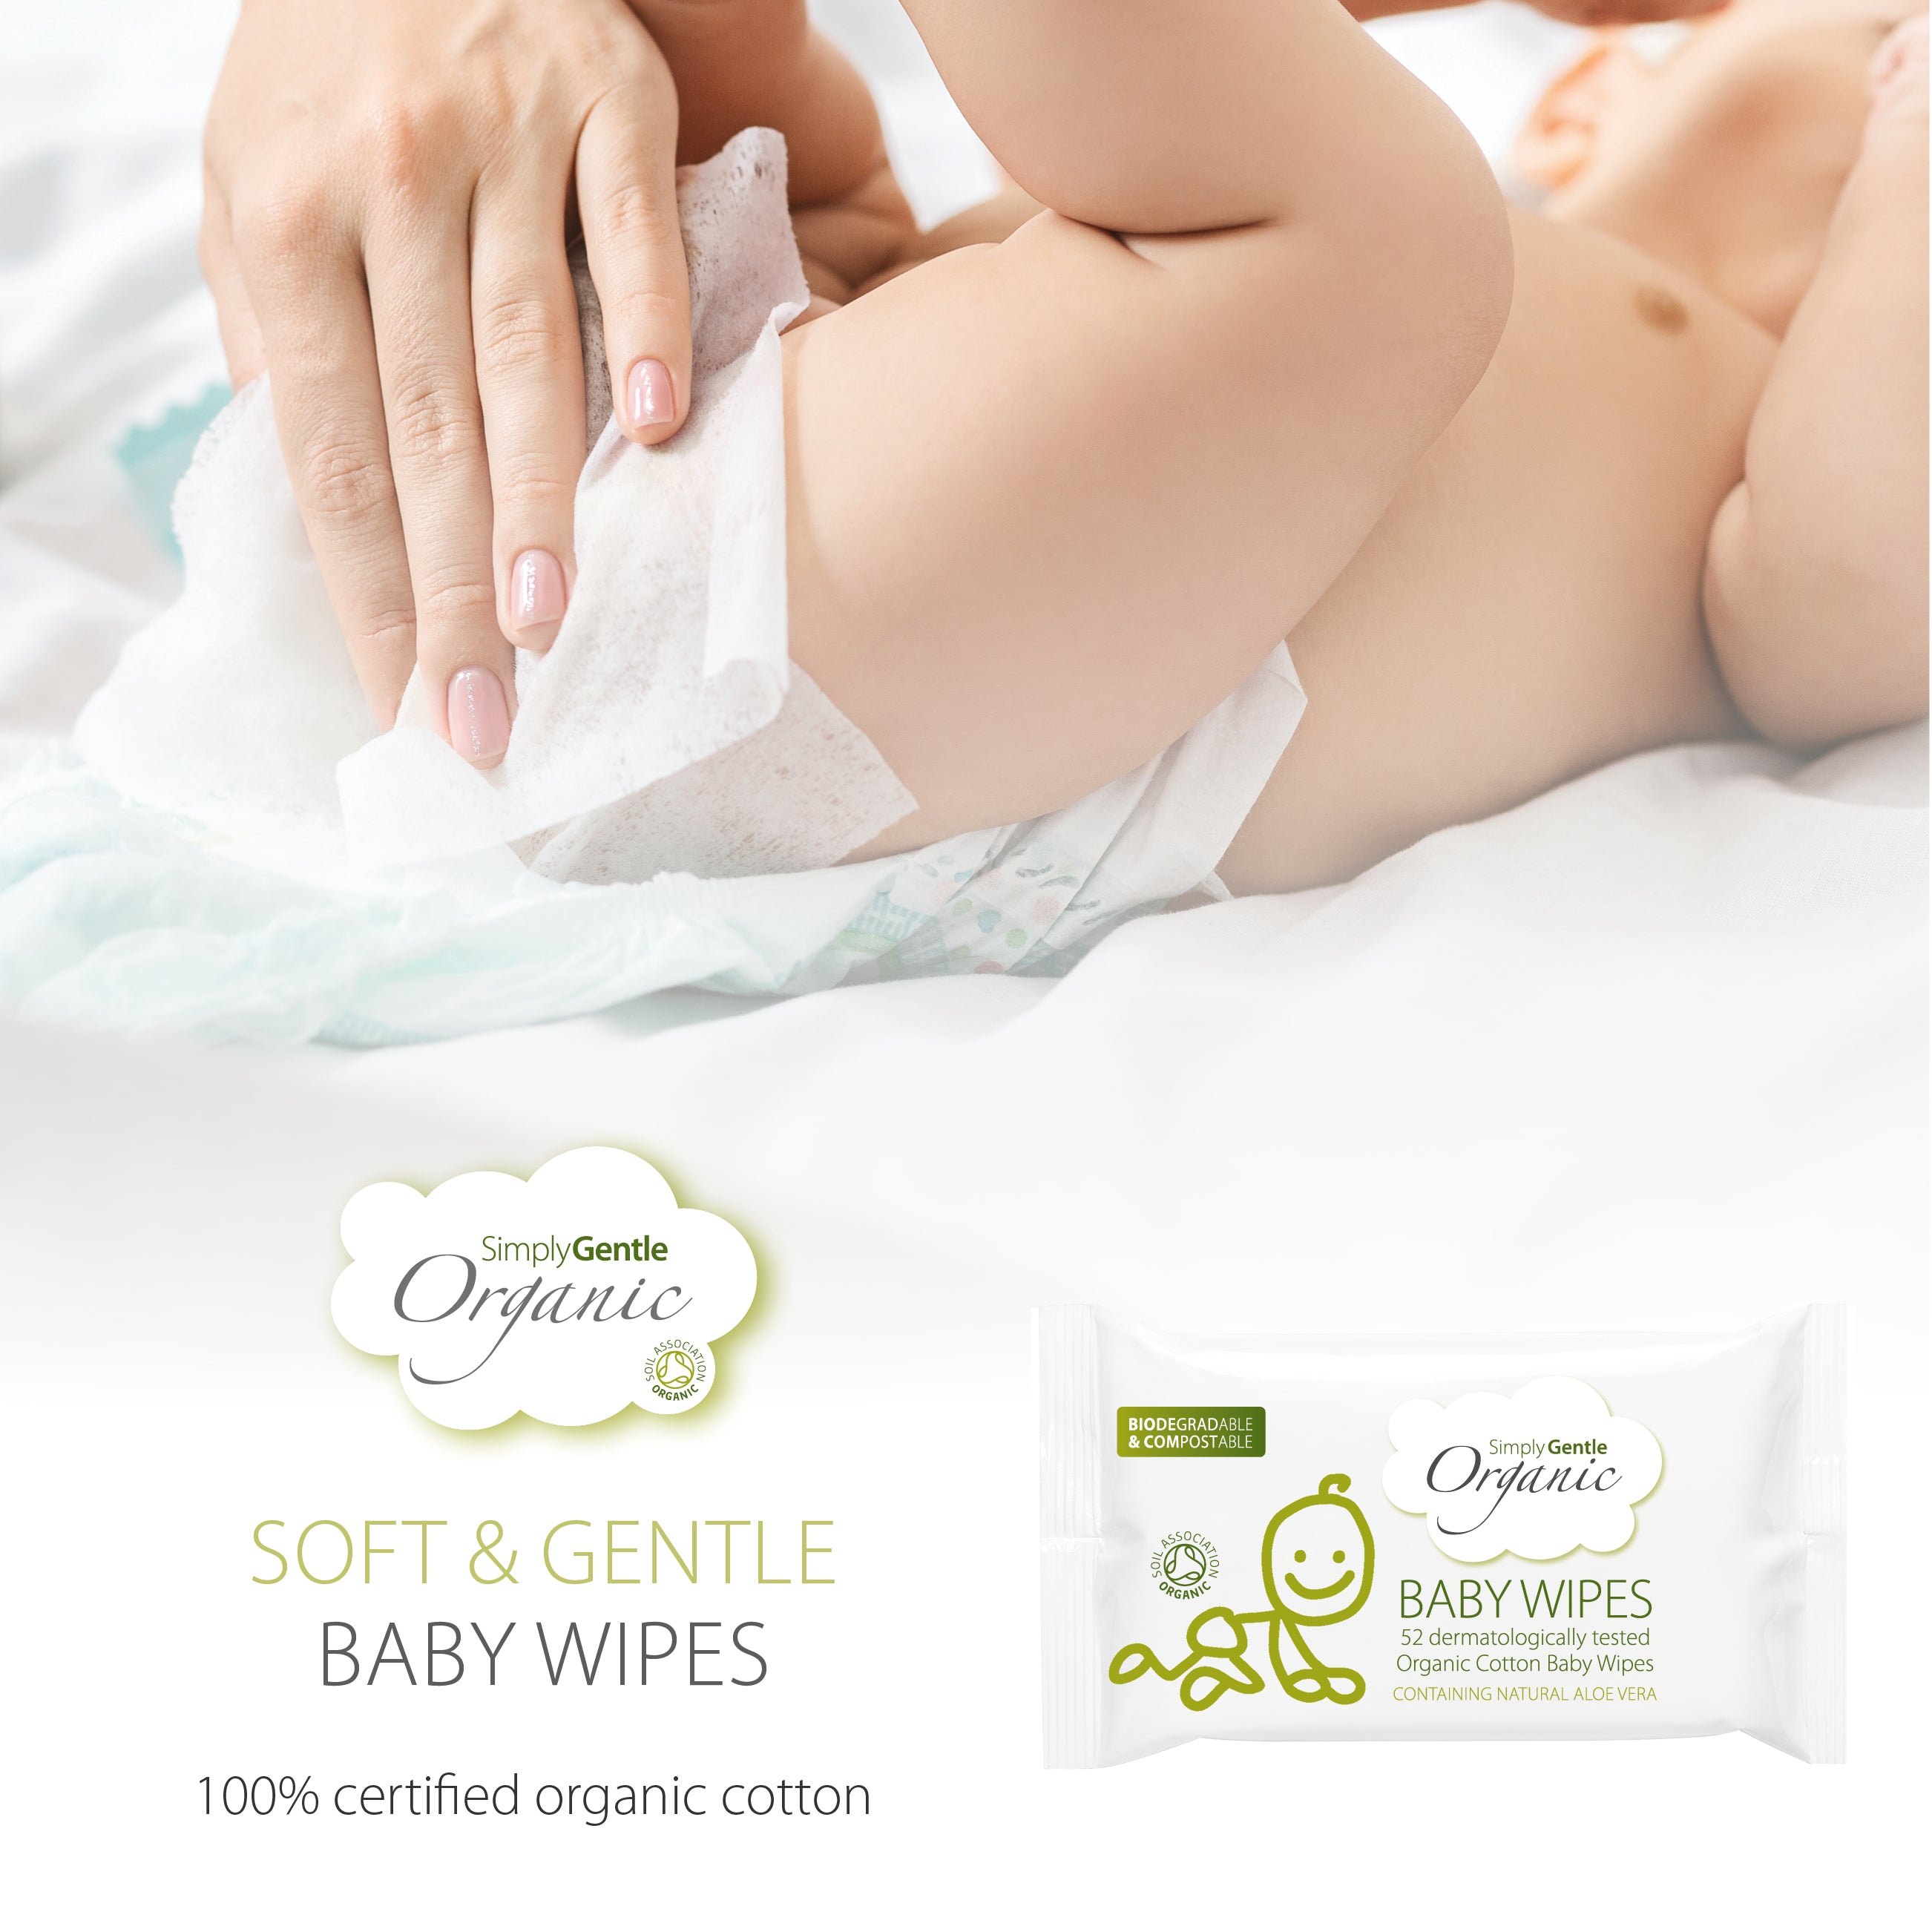 Our Organic Baby Wipes are made from our soft and gentle cotton, impregnated with an organic lotion, making our wipe truly organic. The lotion is made with a blend of Aloe Vera and Green Tea, giving it a subtle fragrance. 100% certified organic cotton. Soil Association approved.